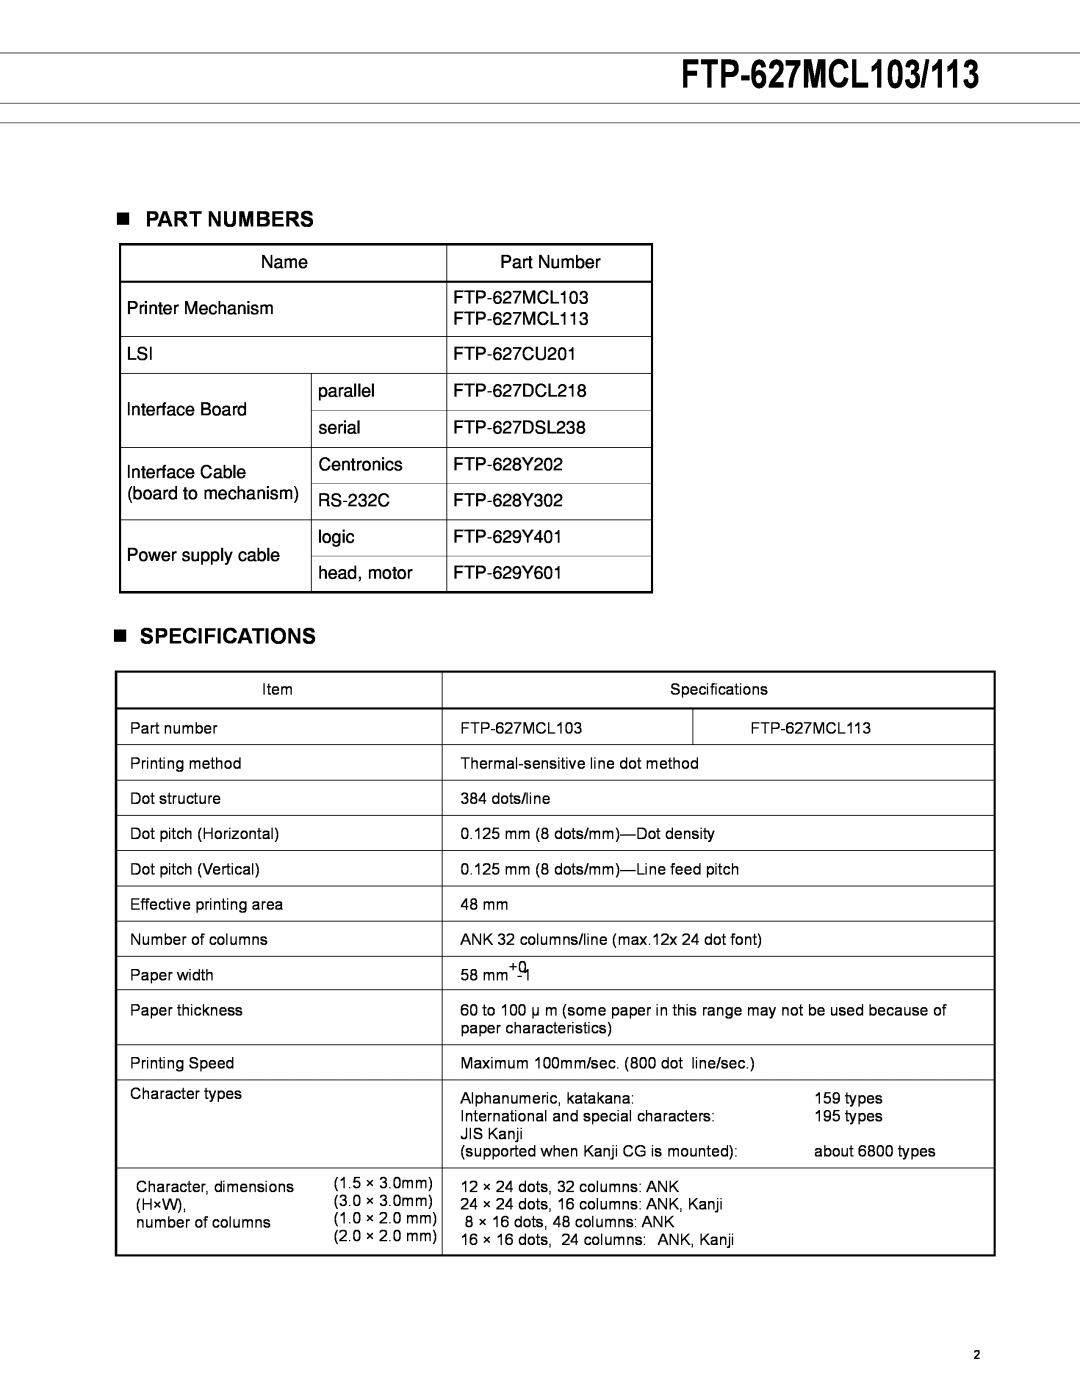 Fujitsu FTP-627MCL113 manual FTP-627MCL103/113, n Part numbers, n SPECIFICATIONS 